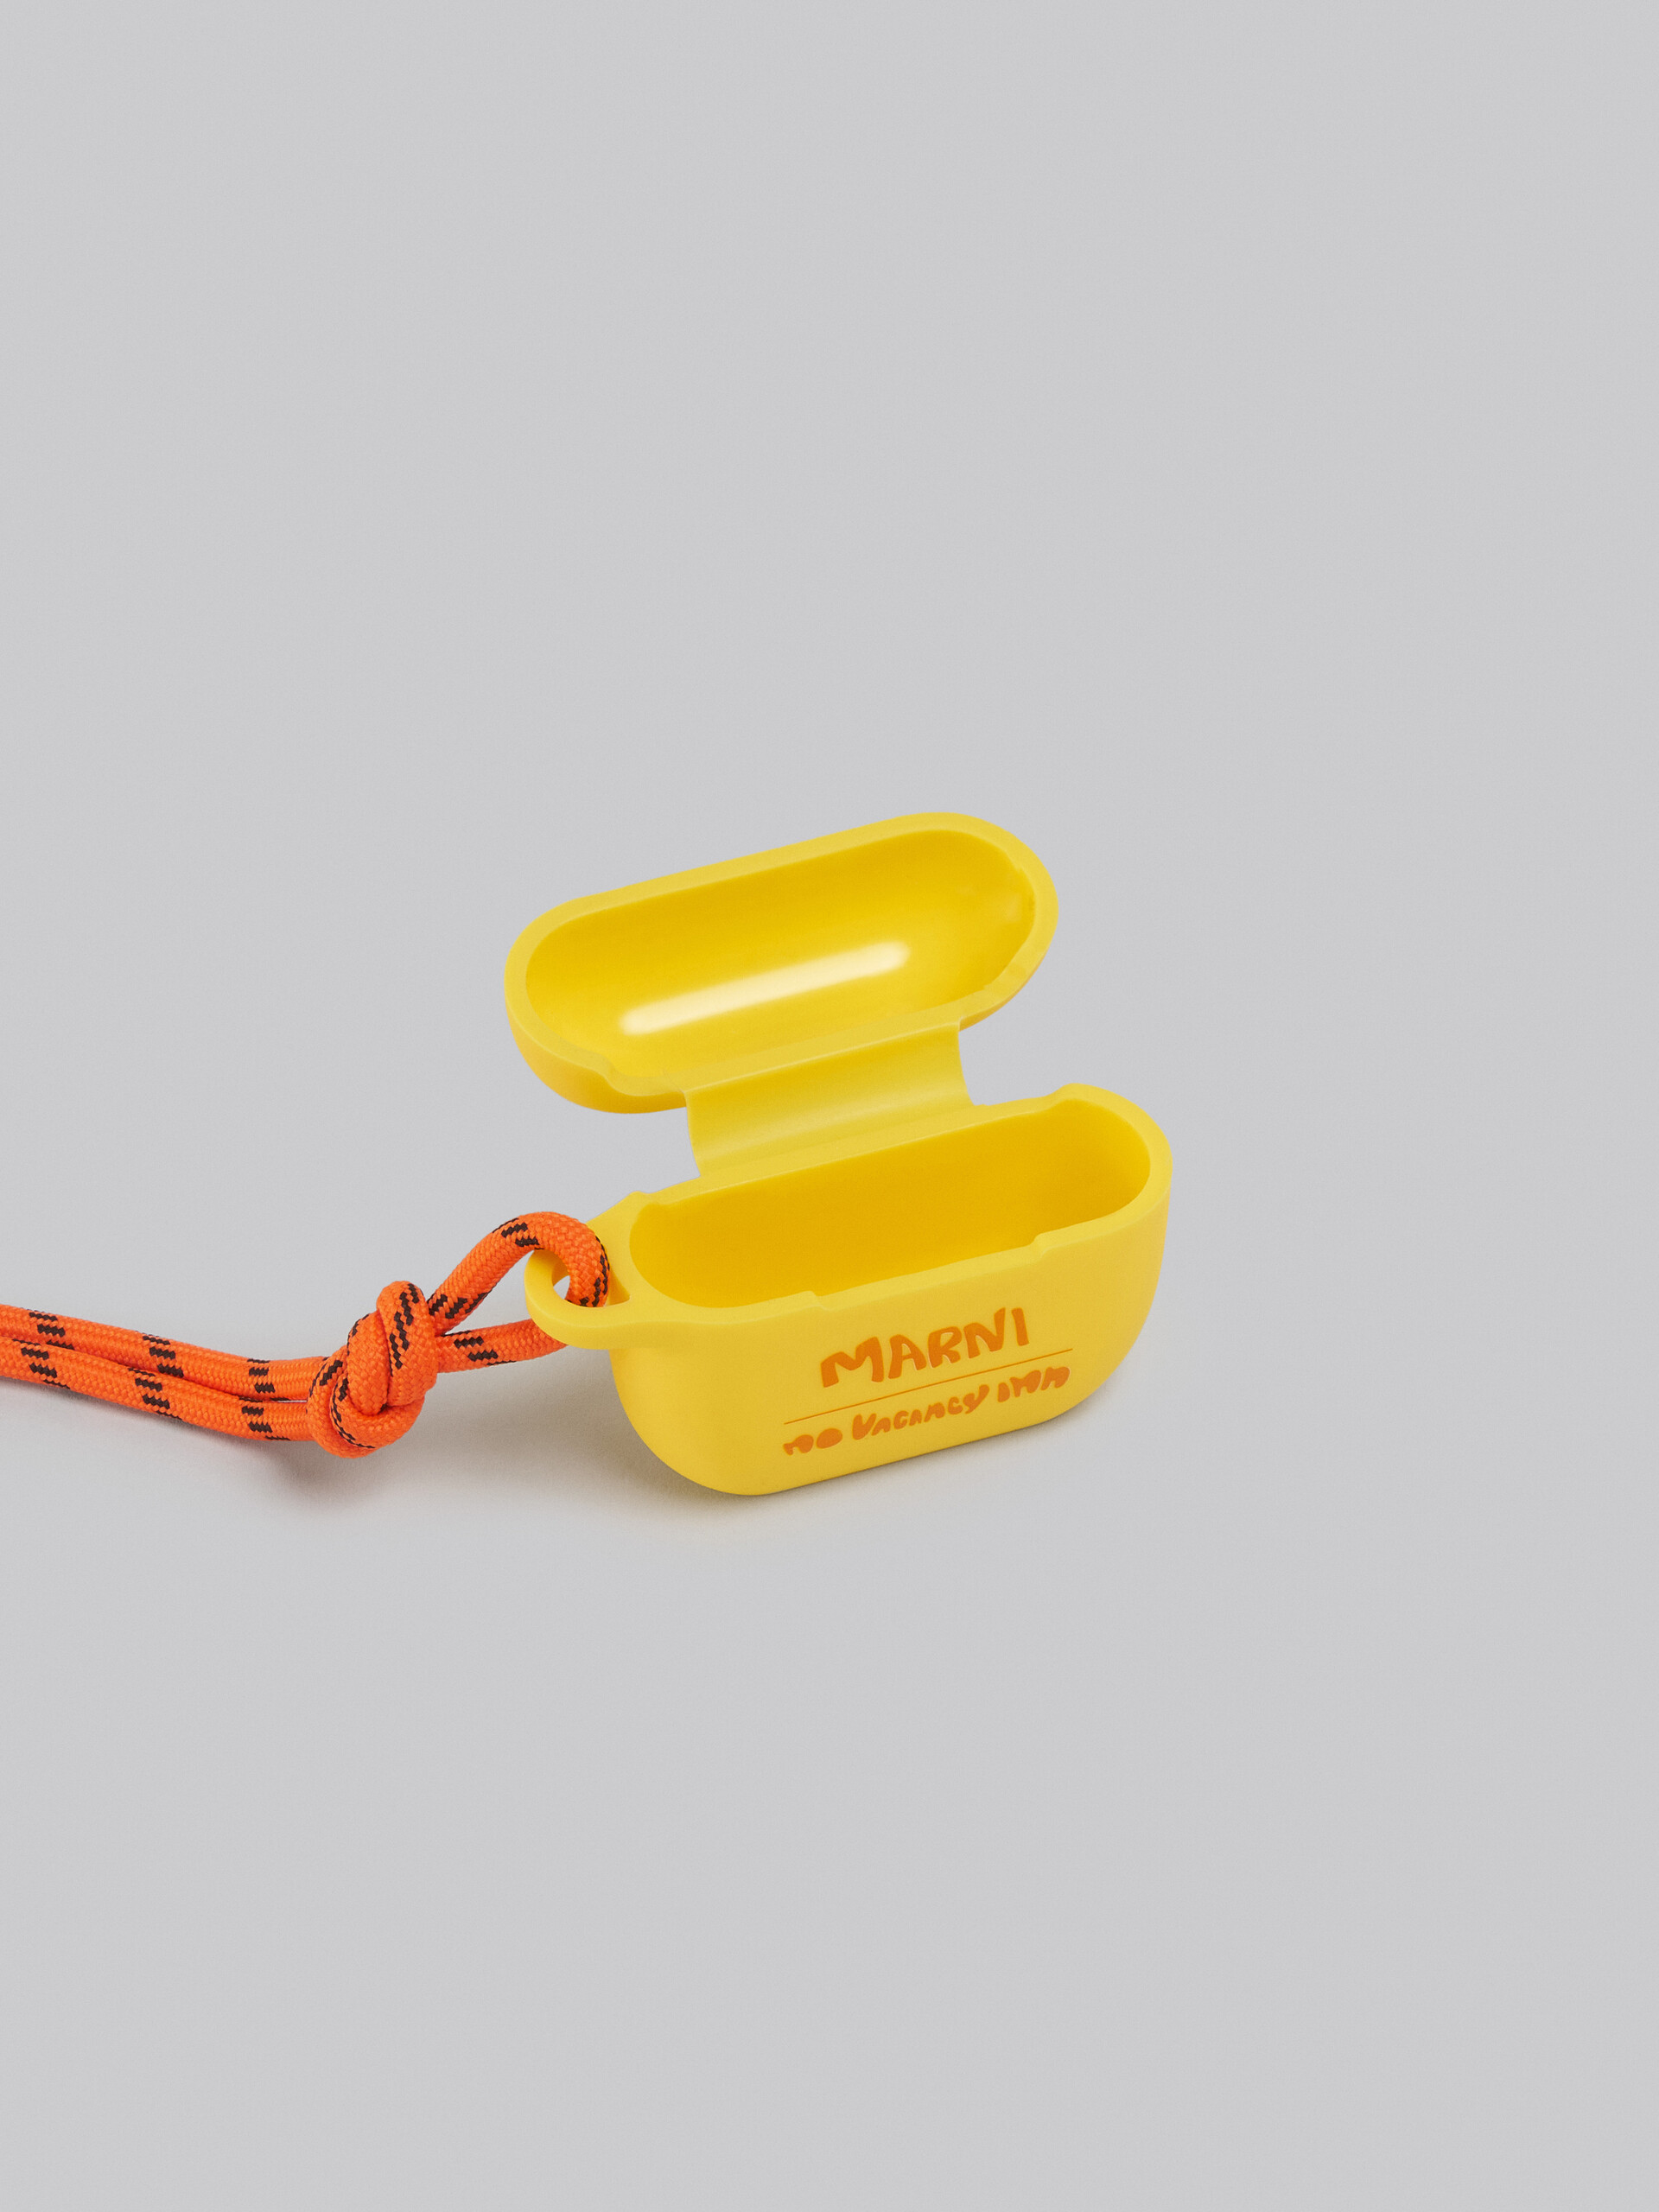 Marni x No Vacancy Inn - Yellow and orange Airpods case - Other accessories - Image 3